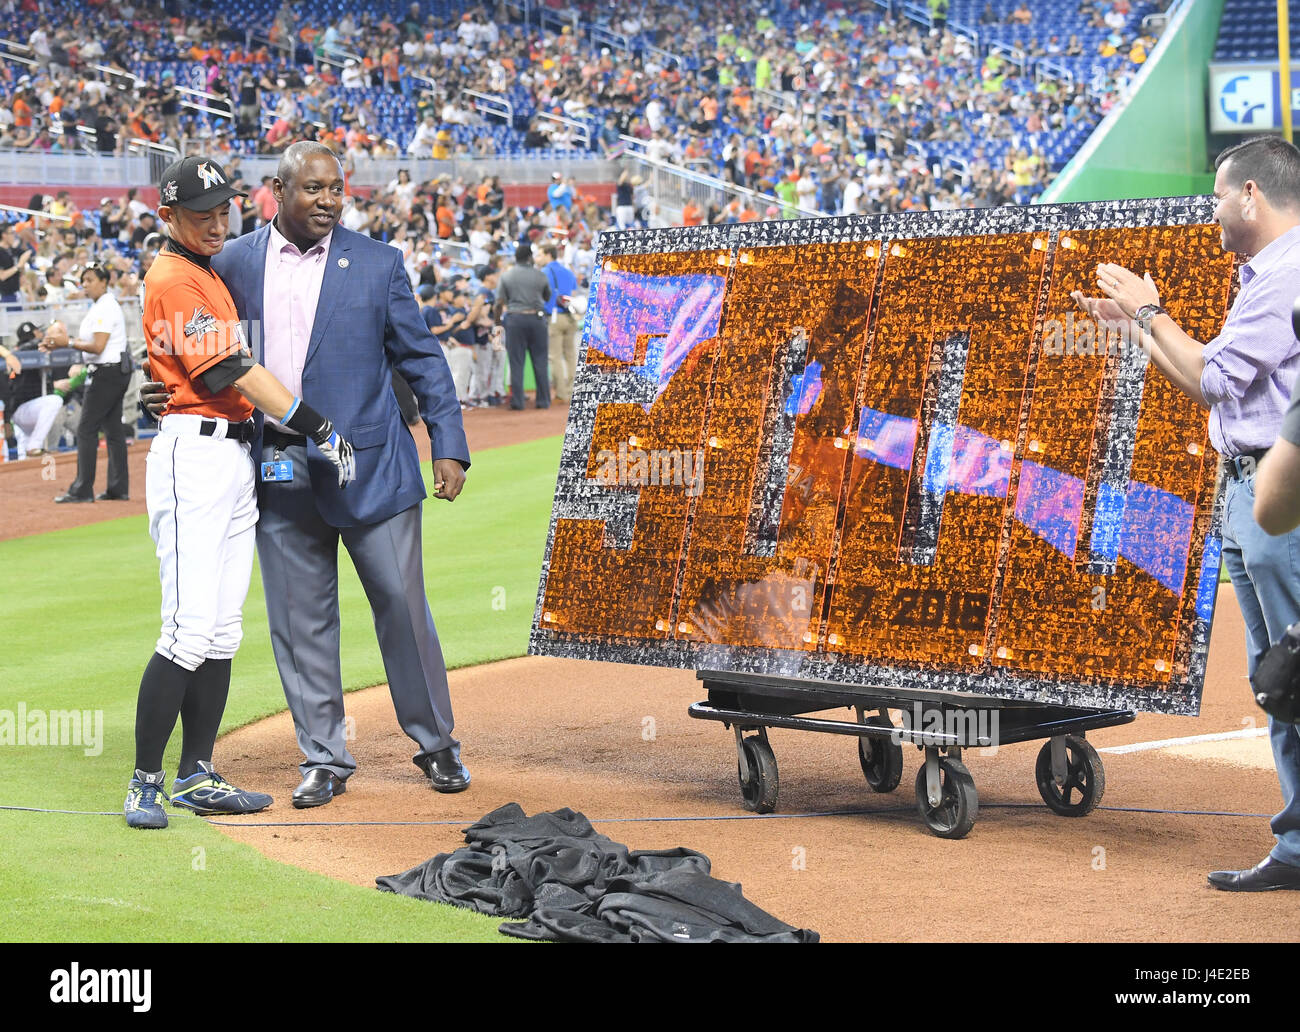 Miami, Florida, USA. 30th Apr, 2017. (L-R) Ichiro Suzuki, Michael Hill, David Samson (Marlins) MLB : Ichiro Suzuki of the Miami Marlins receives a commemorative gift in celebration of his 3000th MLB hit from Marlins President David Samson and President of baseball operations Michael Hill before the Major League Baseball game against the Pittsburgh Pirates at Marlins Park in Miami, Florida, United States . Credit: AFLO/Alamy Live News Stock Photo